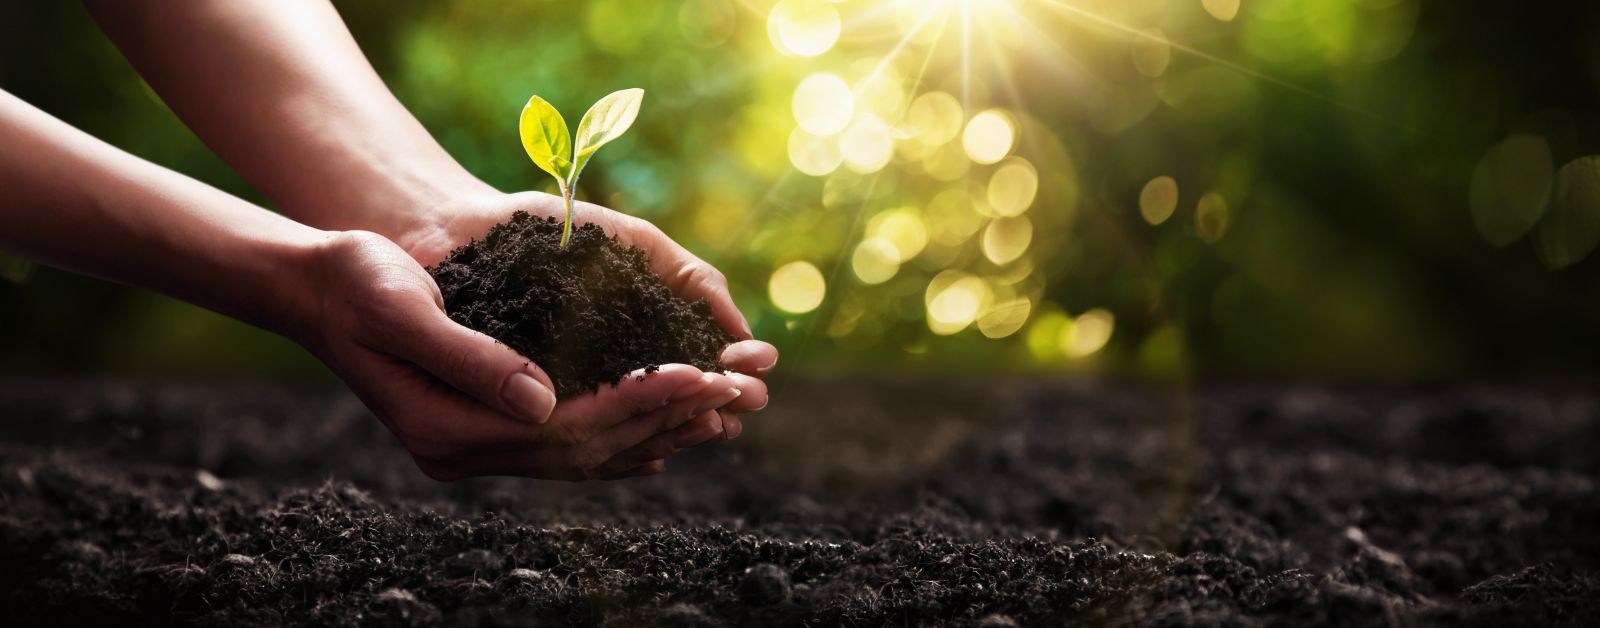 hands planting trees banner image